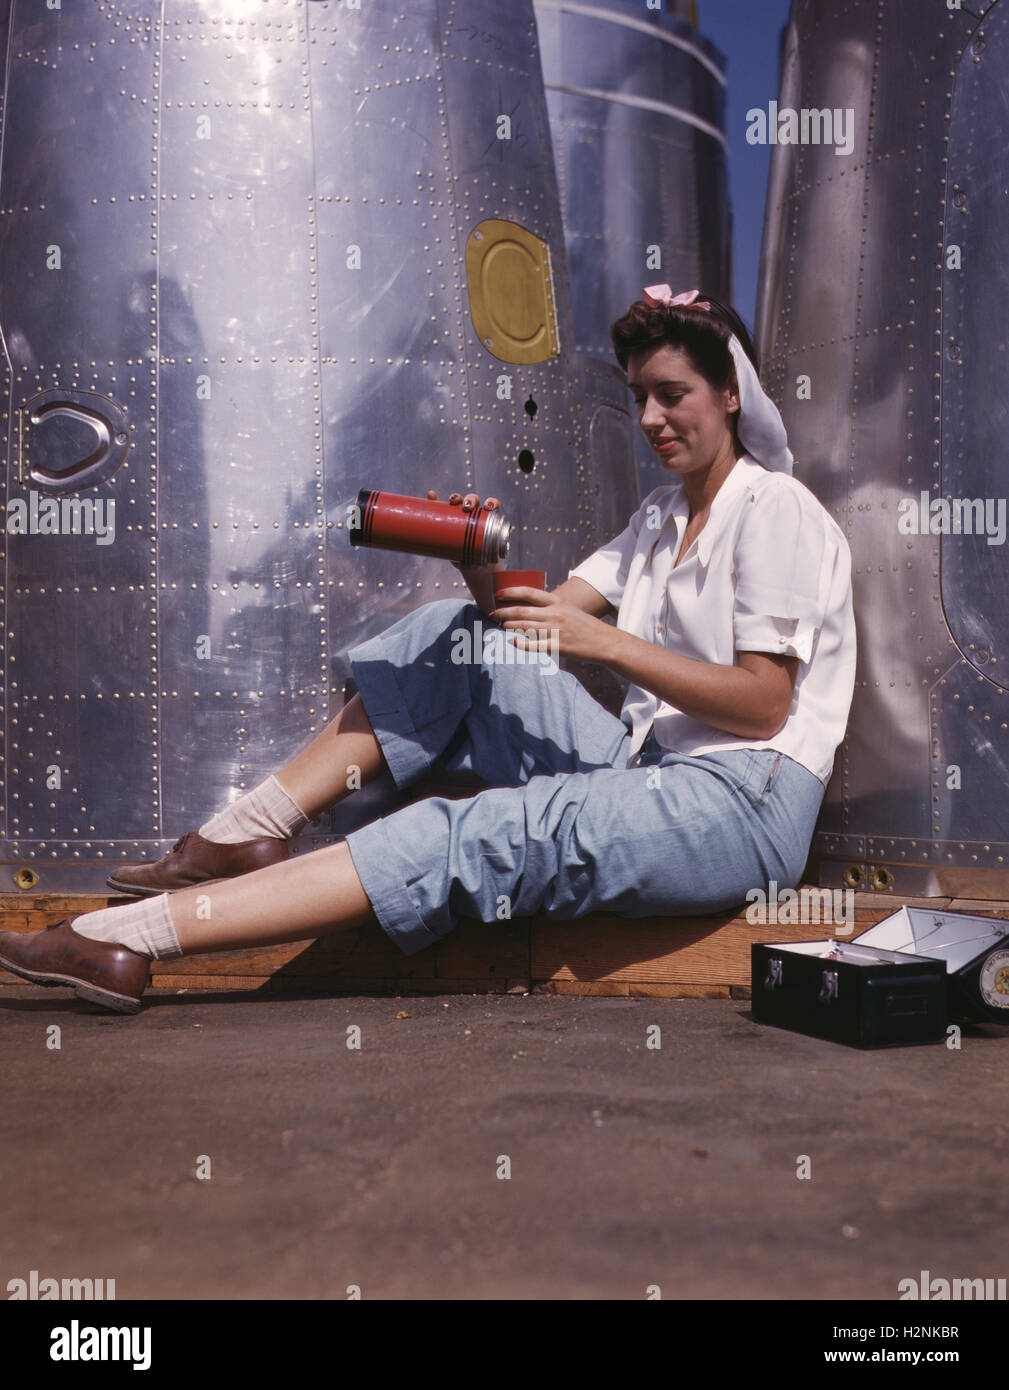 Female Worker Enjoying Sunshine while on Lunch Break , Douglas Aircraft Company, Long Beach, USA, Alfred T. Palmer, U.S. Office of War Information, October 1942 Stock Photo